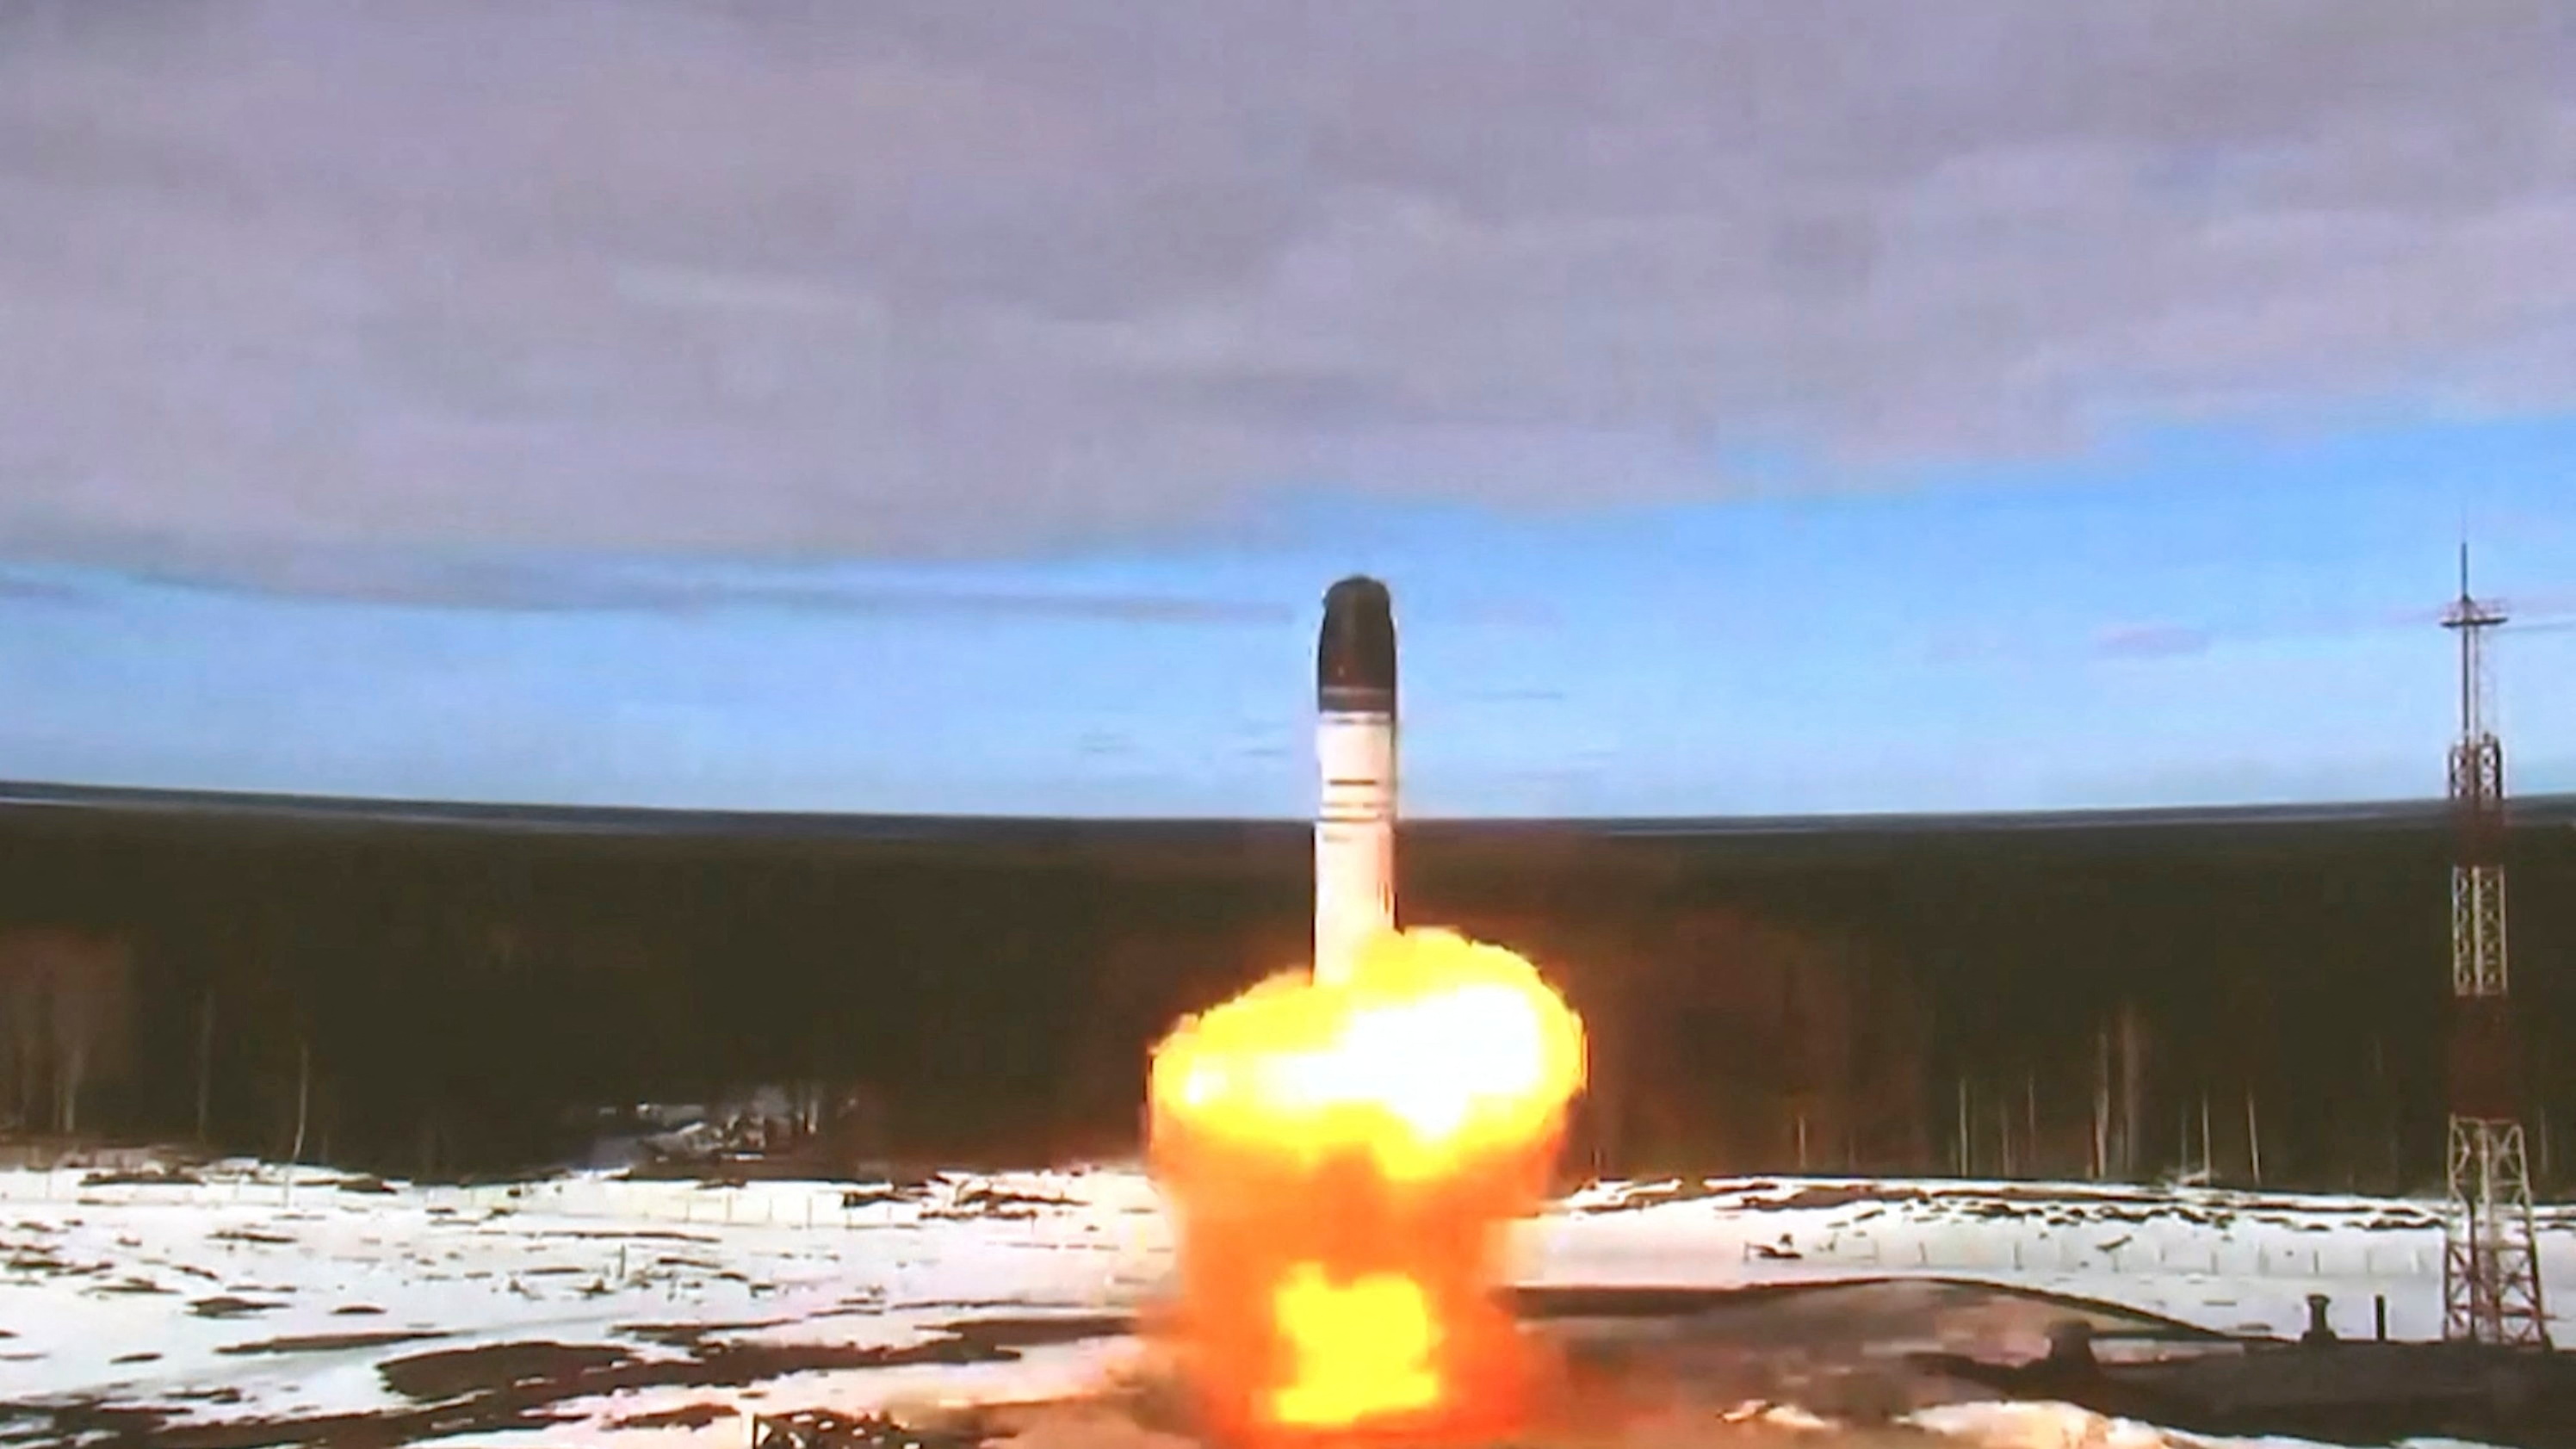 The Sarmat intercontinental ballistic missile is launched during a test at Plesetsk cosmodrome